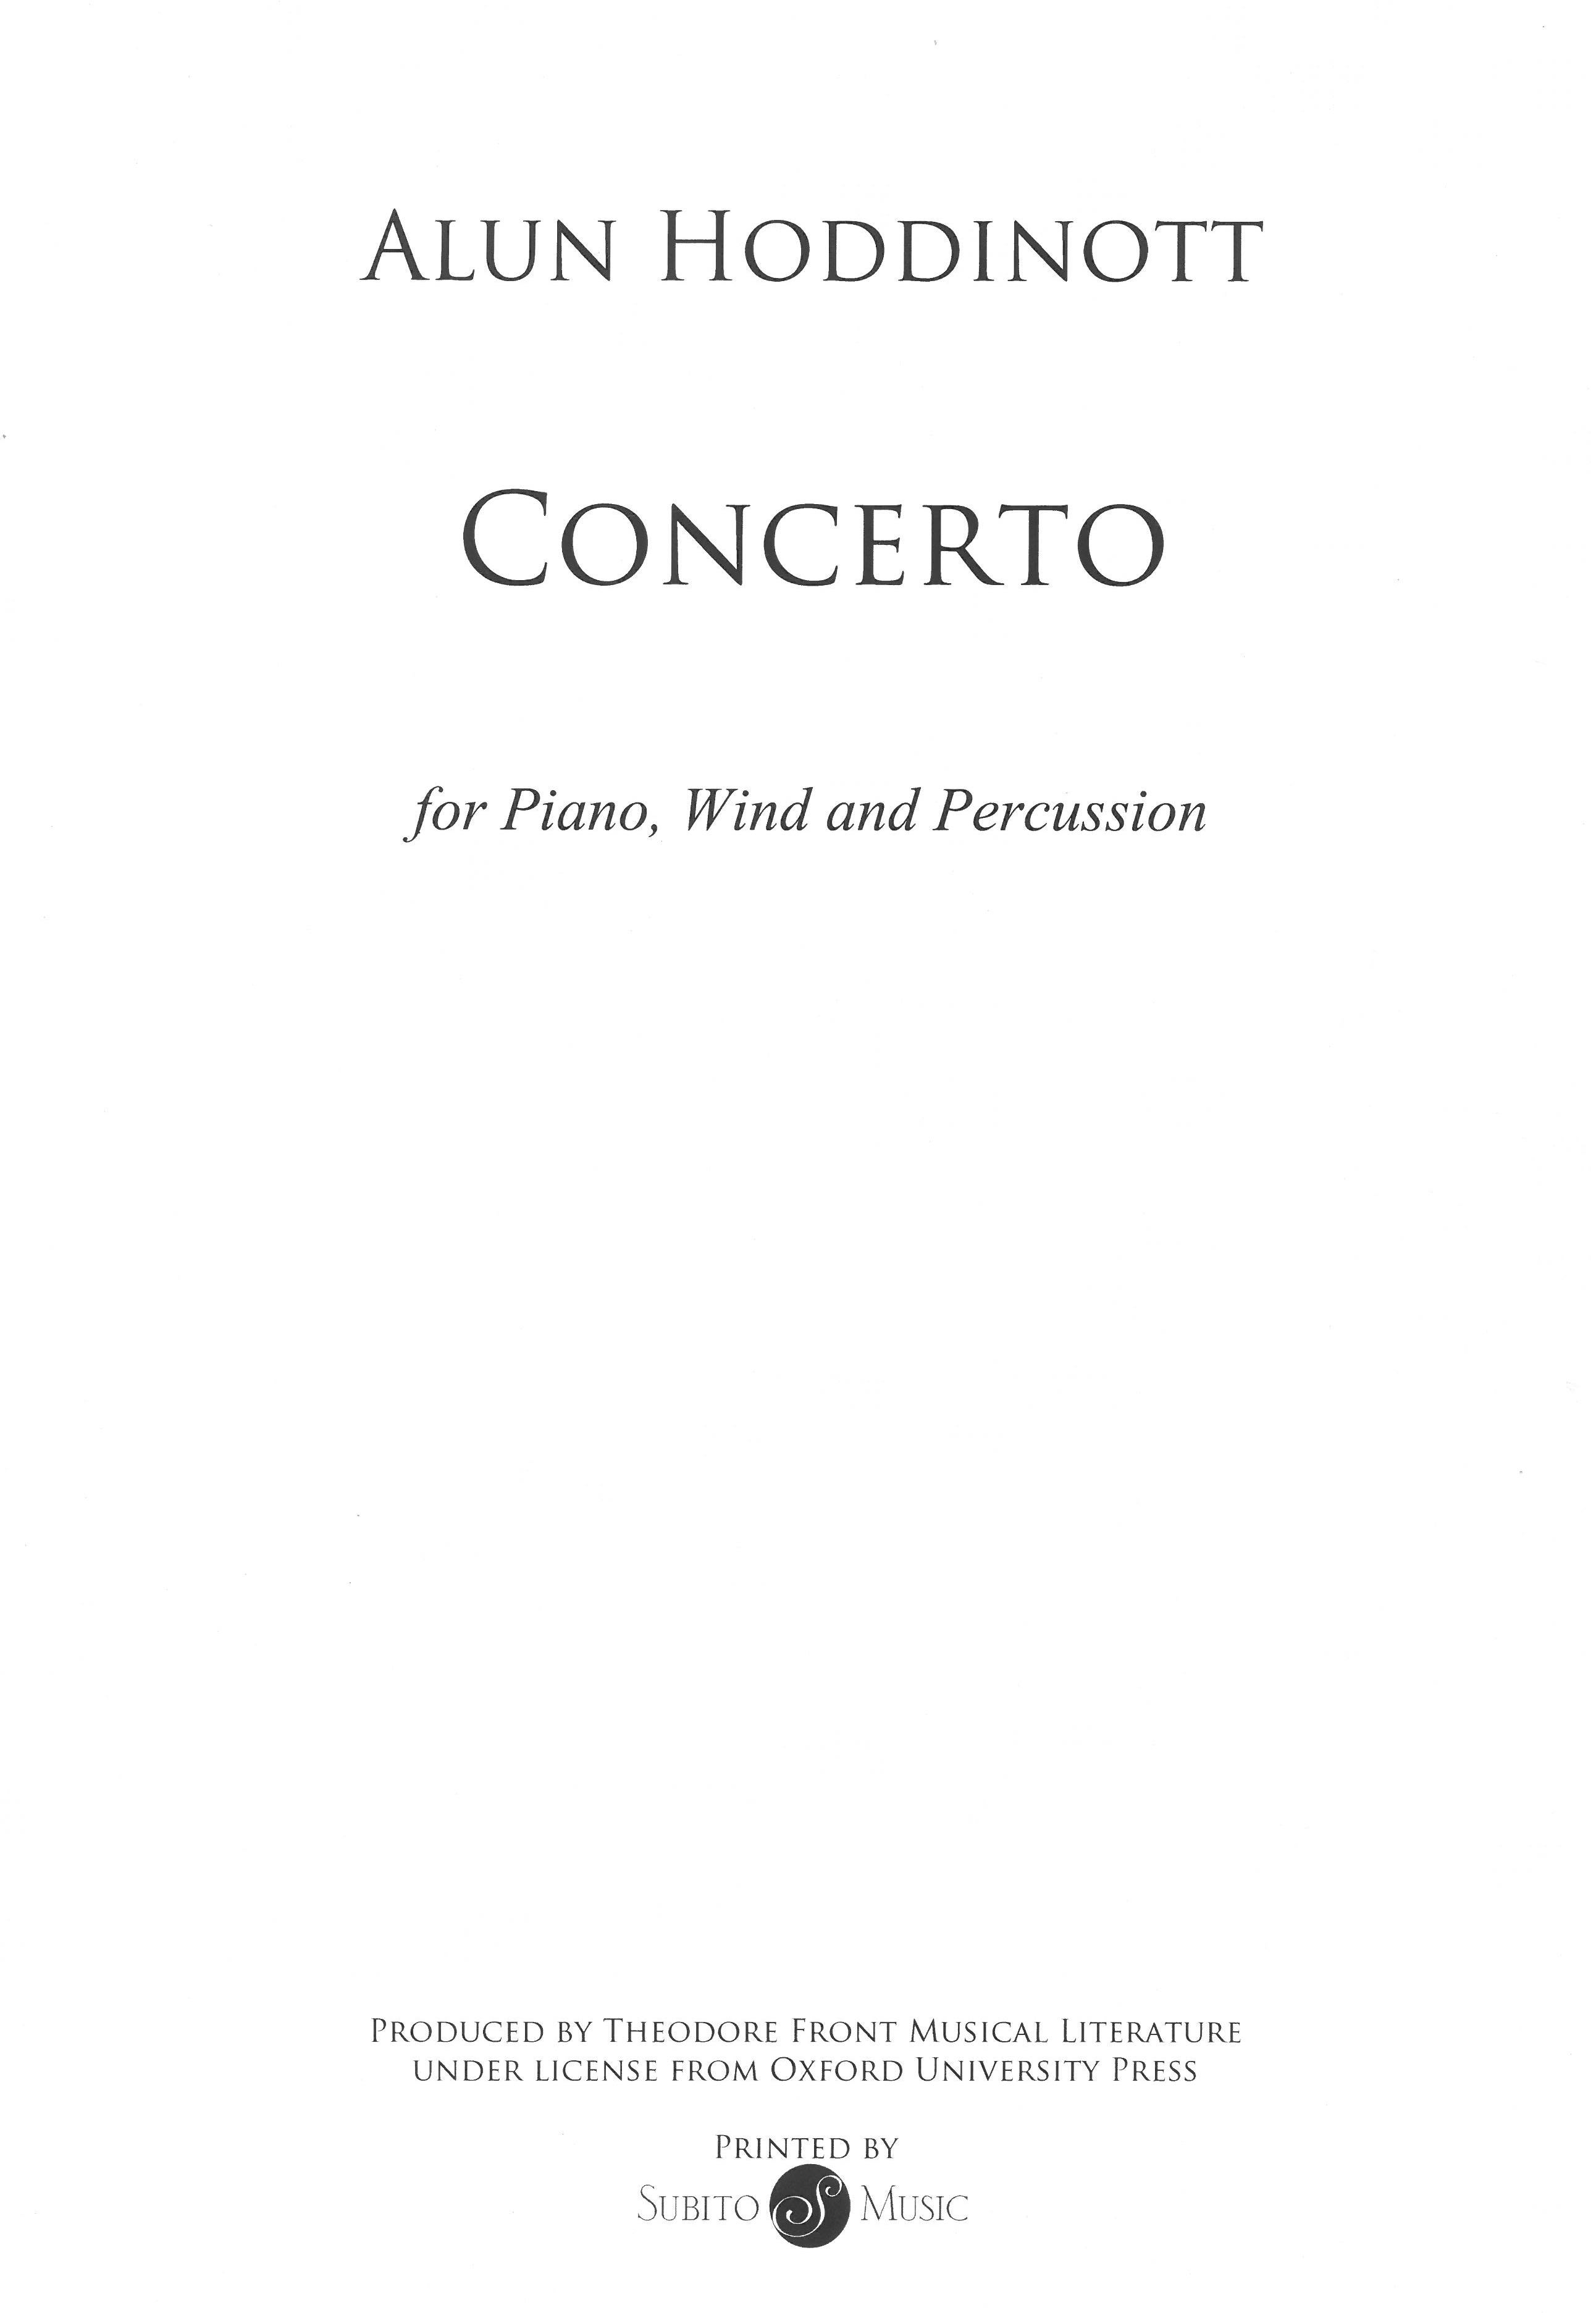 Concerto, Op. 19 : For Piano, Wind and Percussion.